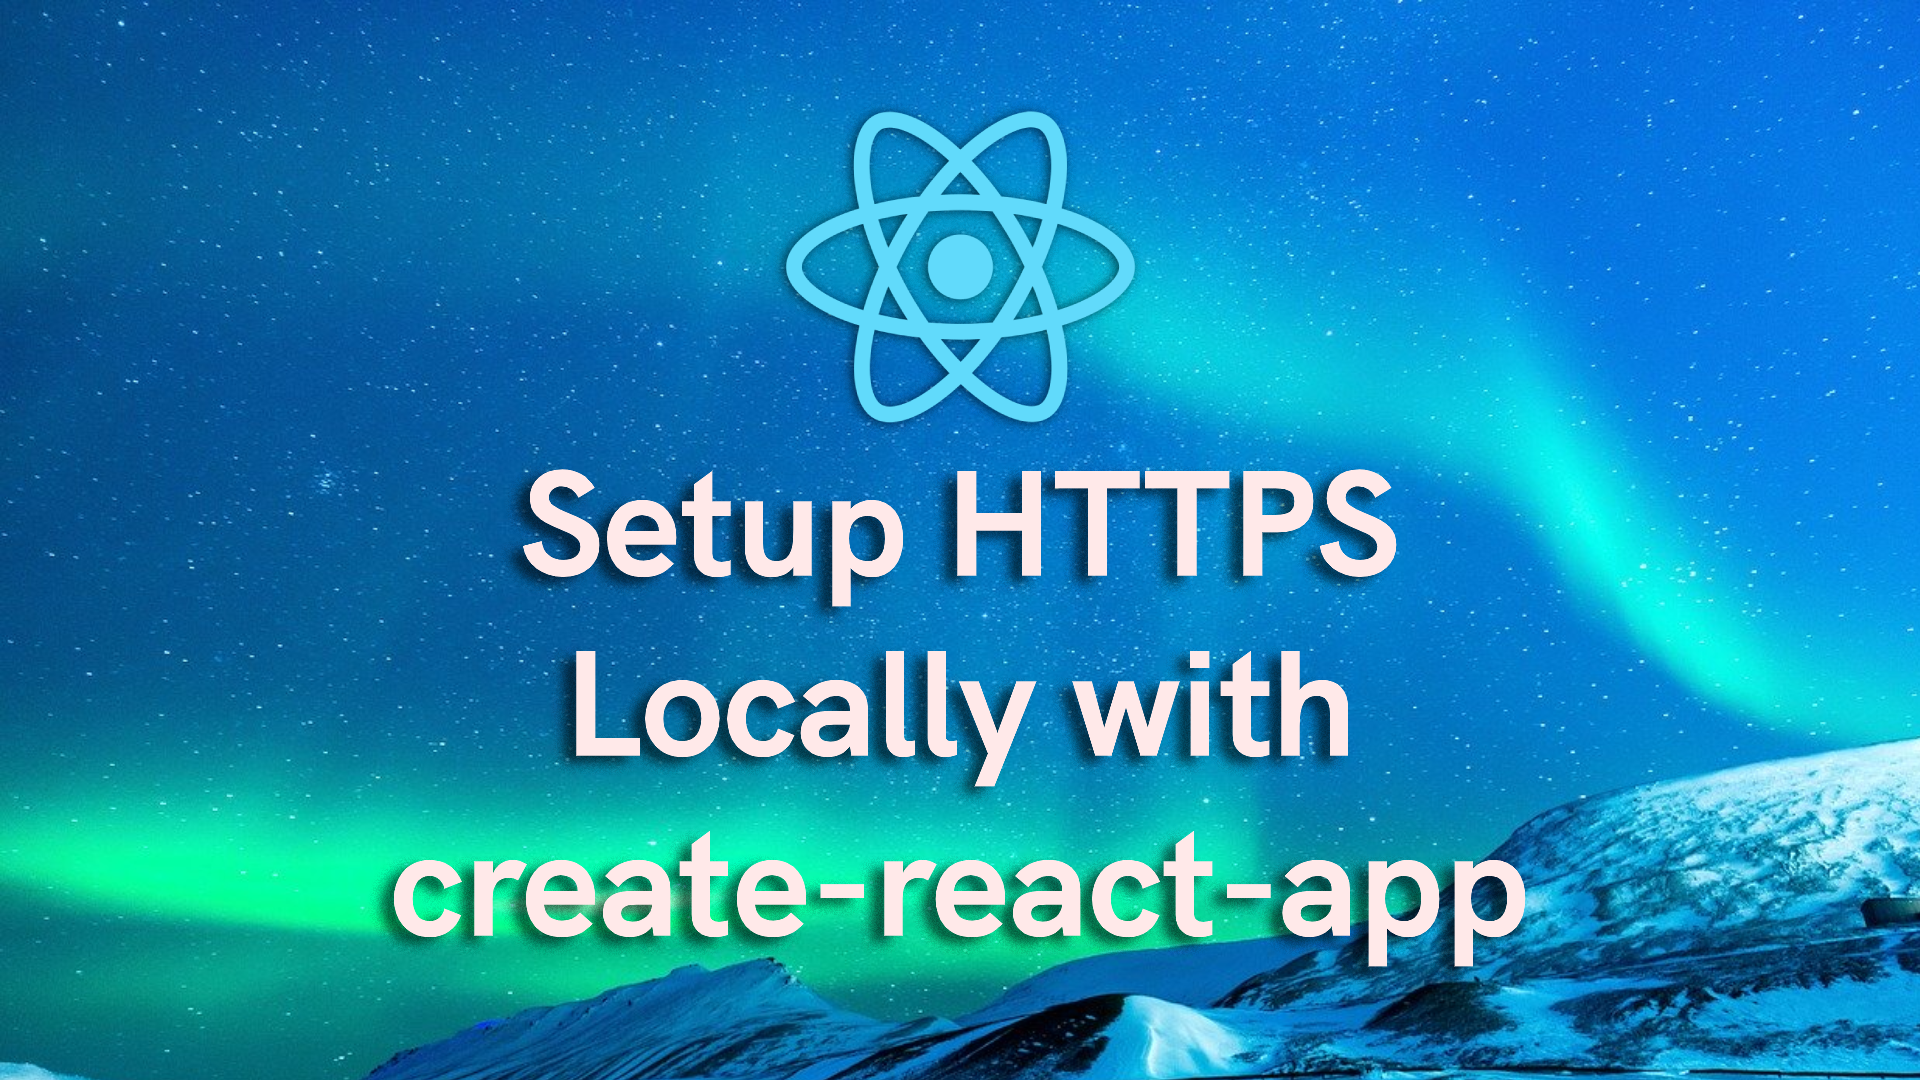 How to Setup HTTPS Locally with create-react-app